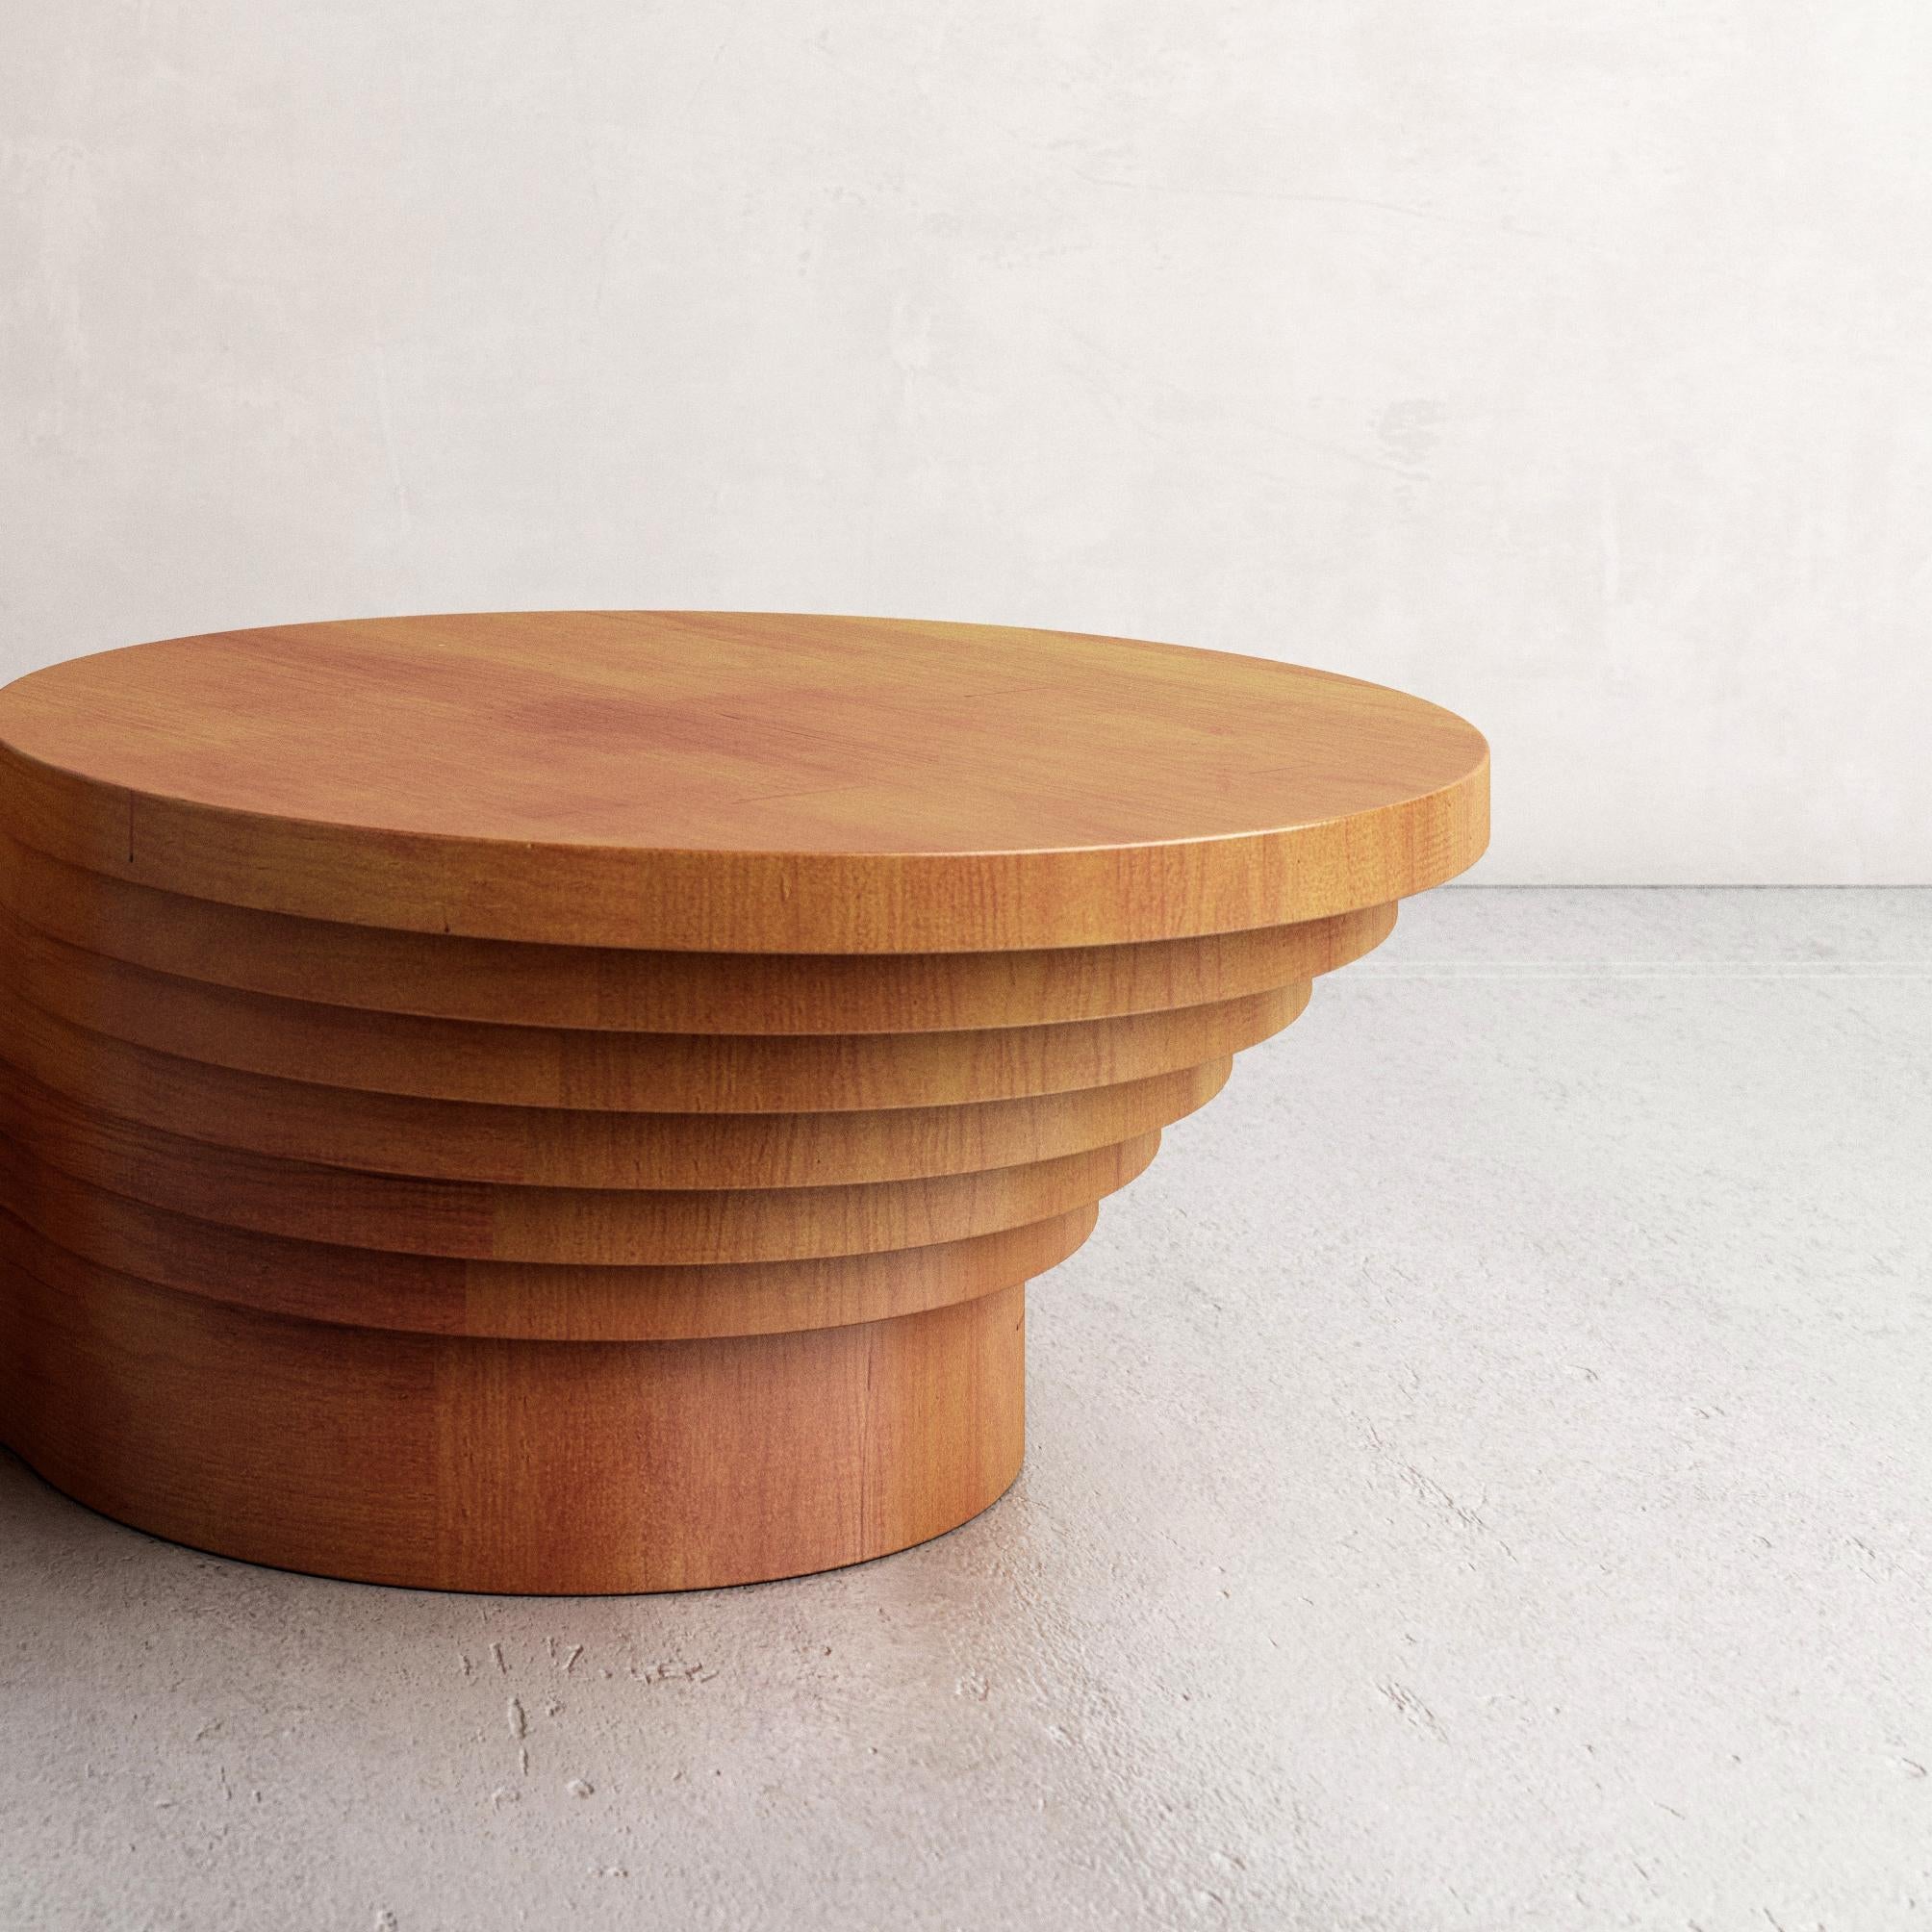 Italian Wood Slice Me Up Sculptural Coffee Table by Pietro Franceschini